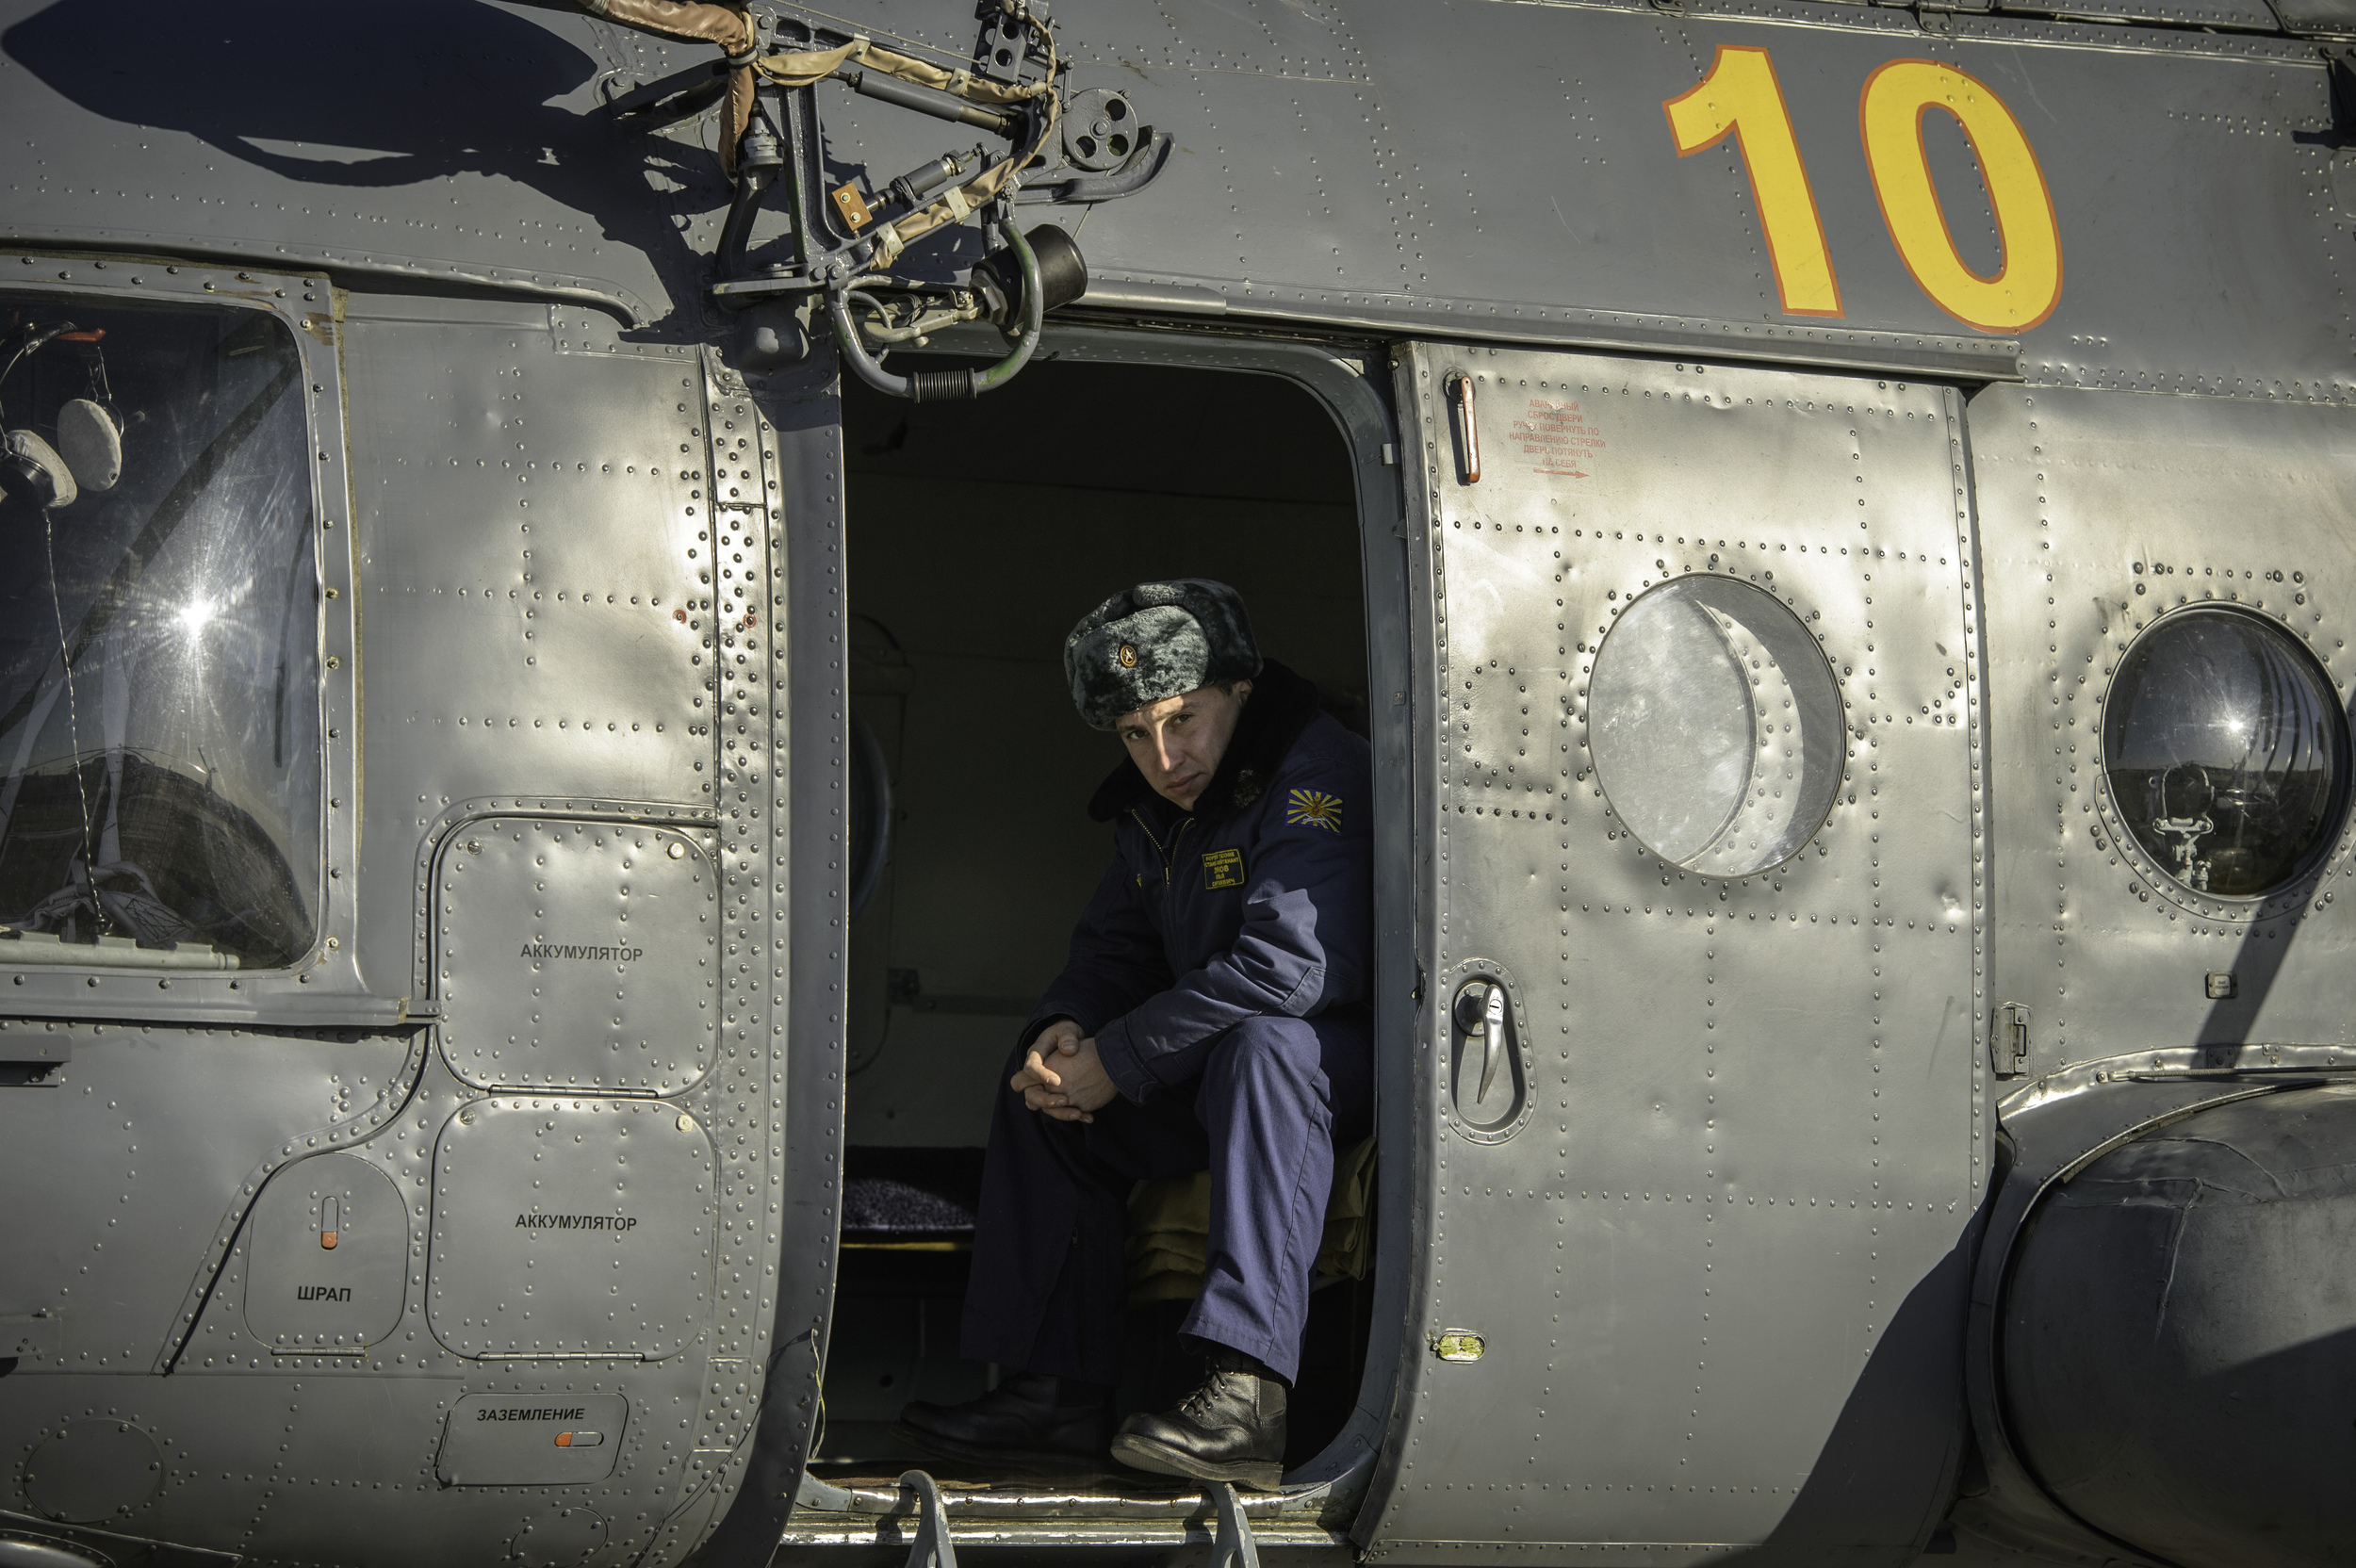  A member of Russian search and rescue is seen in his helicopter after landing at Zhezkazgan airport in Kazakhstan, Sunday, Nov. 10, 2013, a day ahead of the scheduled landing of the Soyuz TMA-09M spacecraft with Expedition 37 Commander Fyodor Yurchi